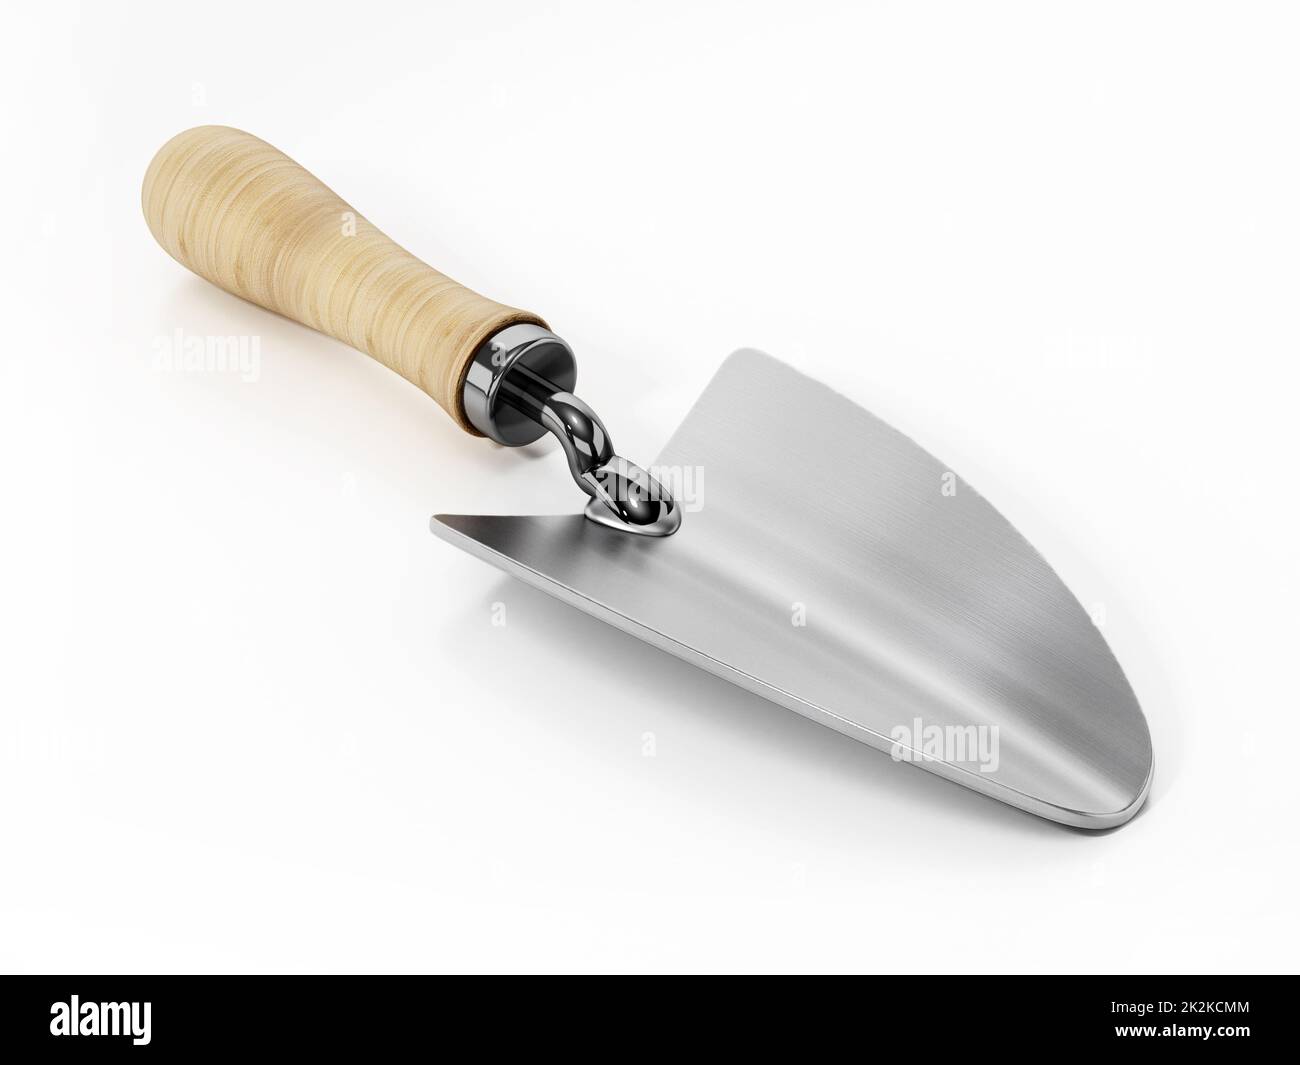 Construction trowel isolated on white background. 3D illustration Stock Photo